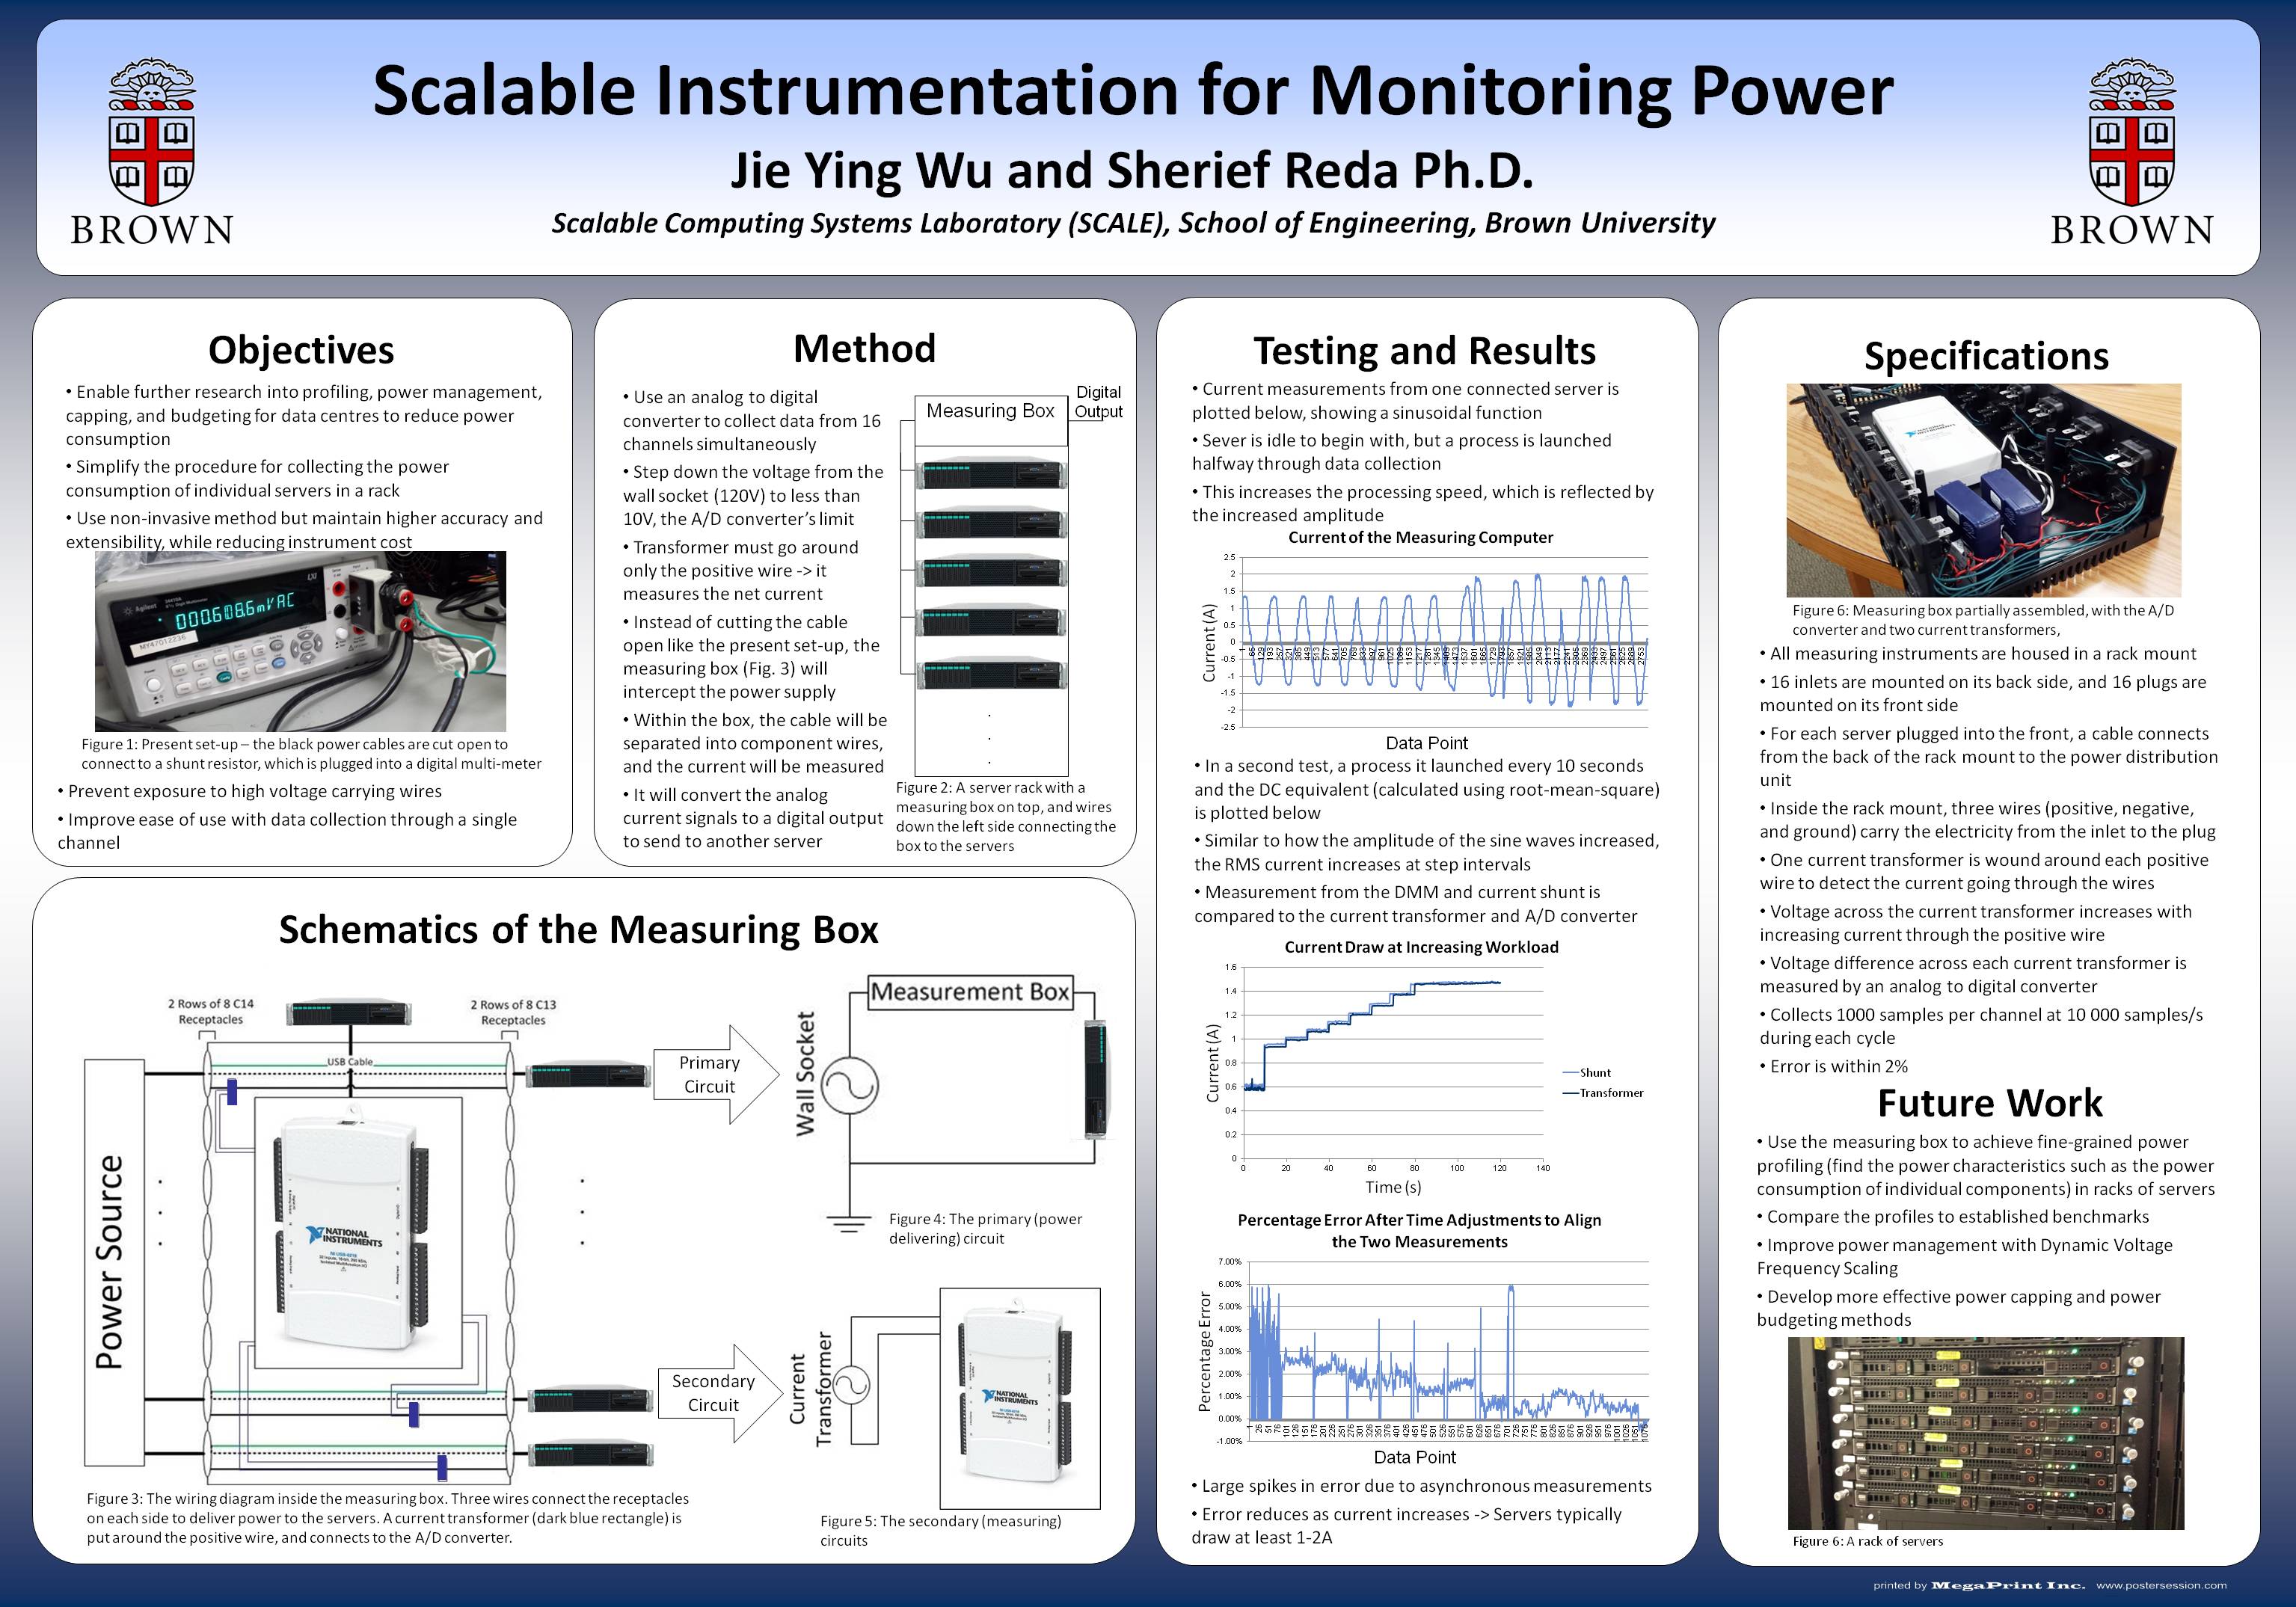 Presenting a power measurement system